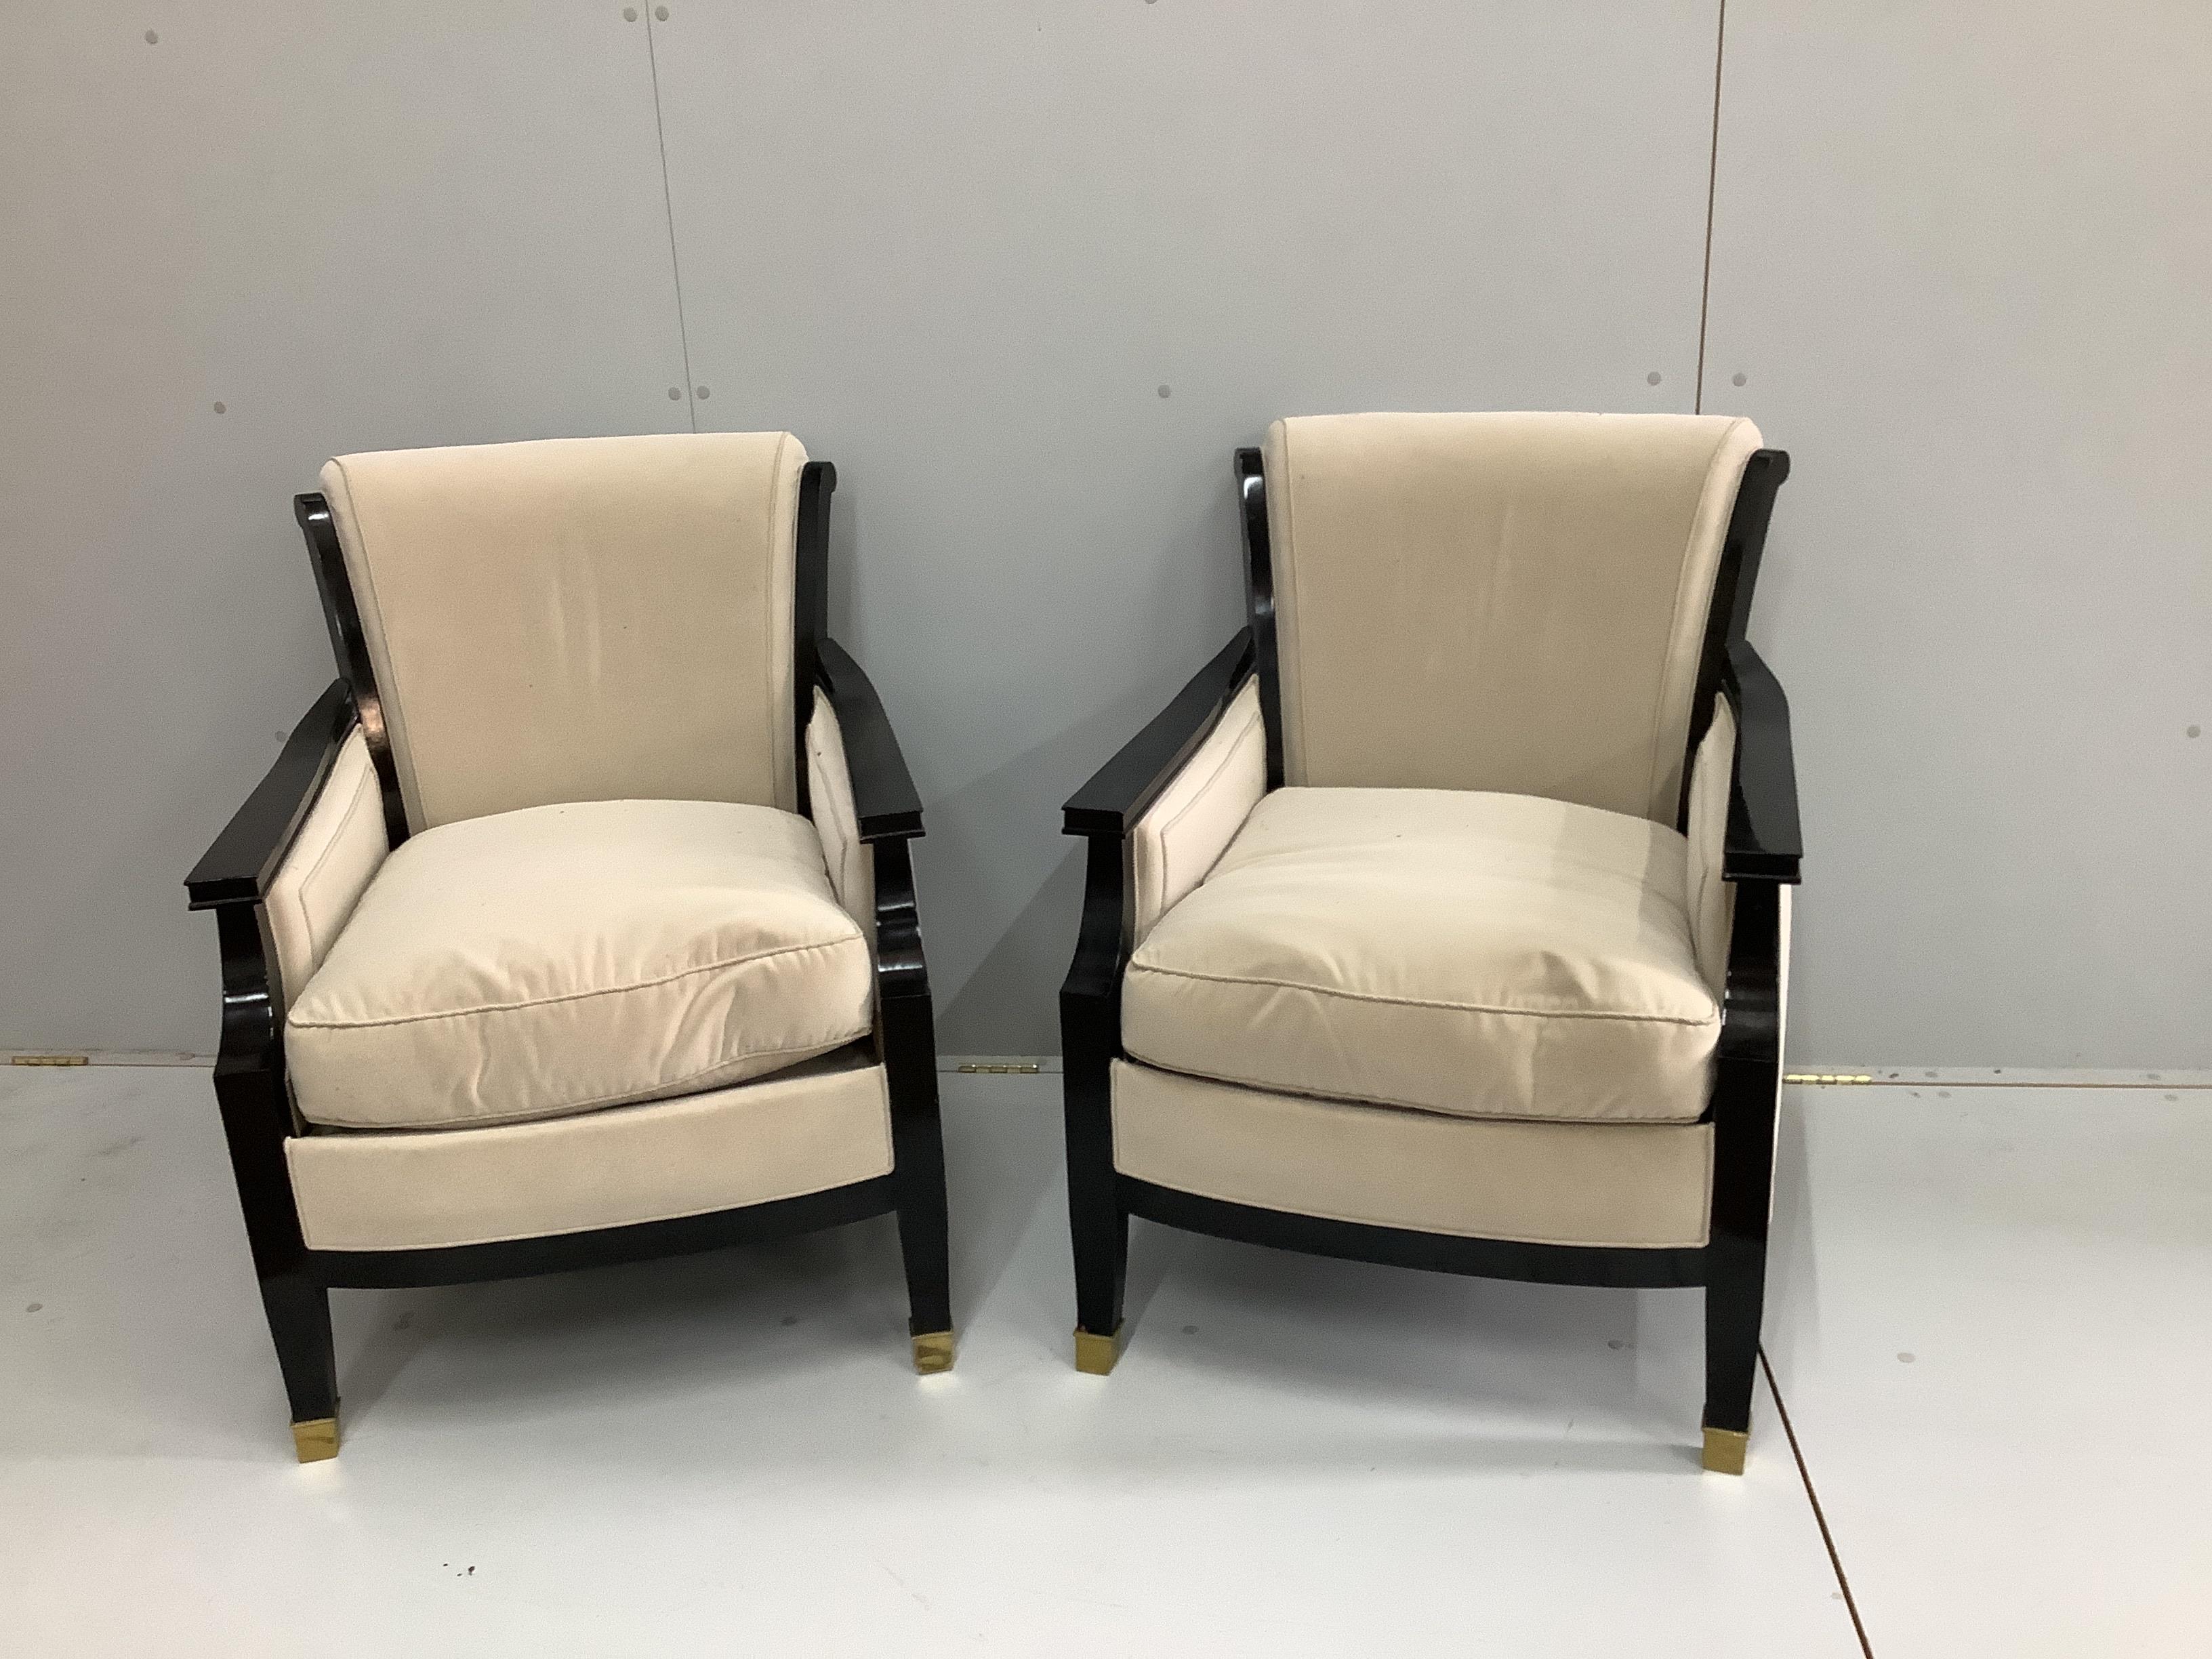 A pair of mid century French Maison Jansen ebonised armchairs with suede effect upholstery, width 68cm, depth 62cm, height 90cm (Bought by the current owner from Galerie Andre Hayat, Paris approximately seven years ago)